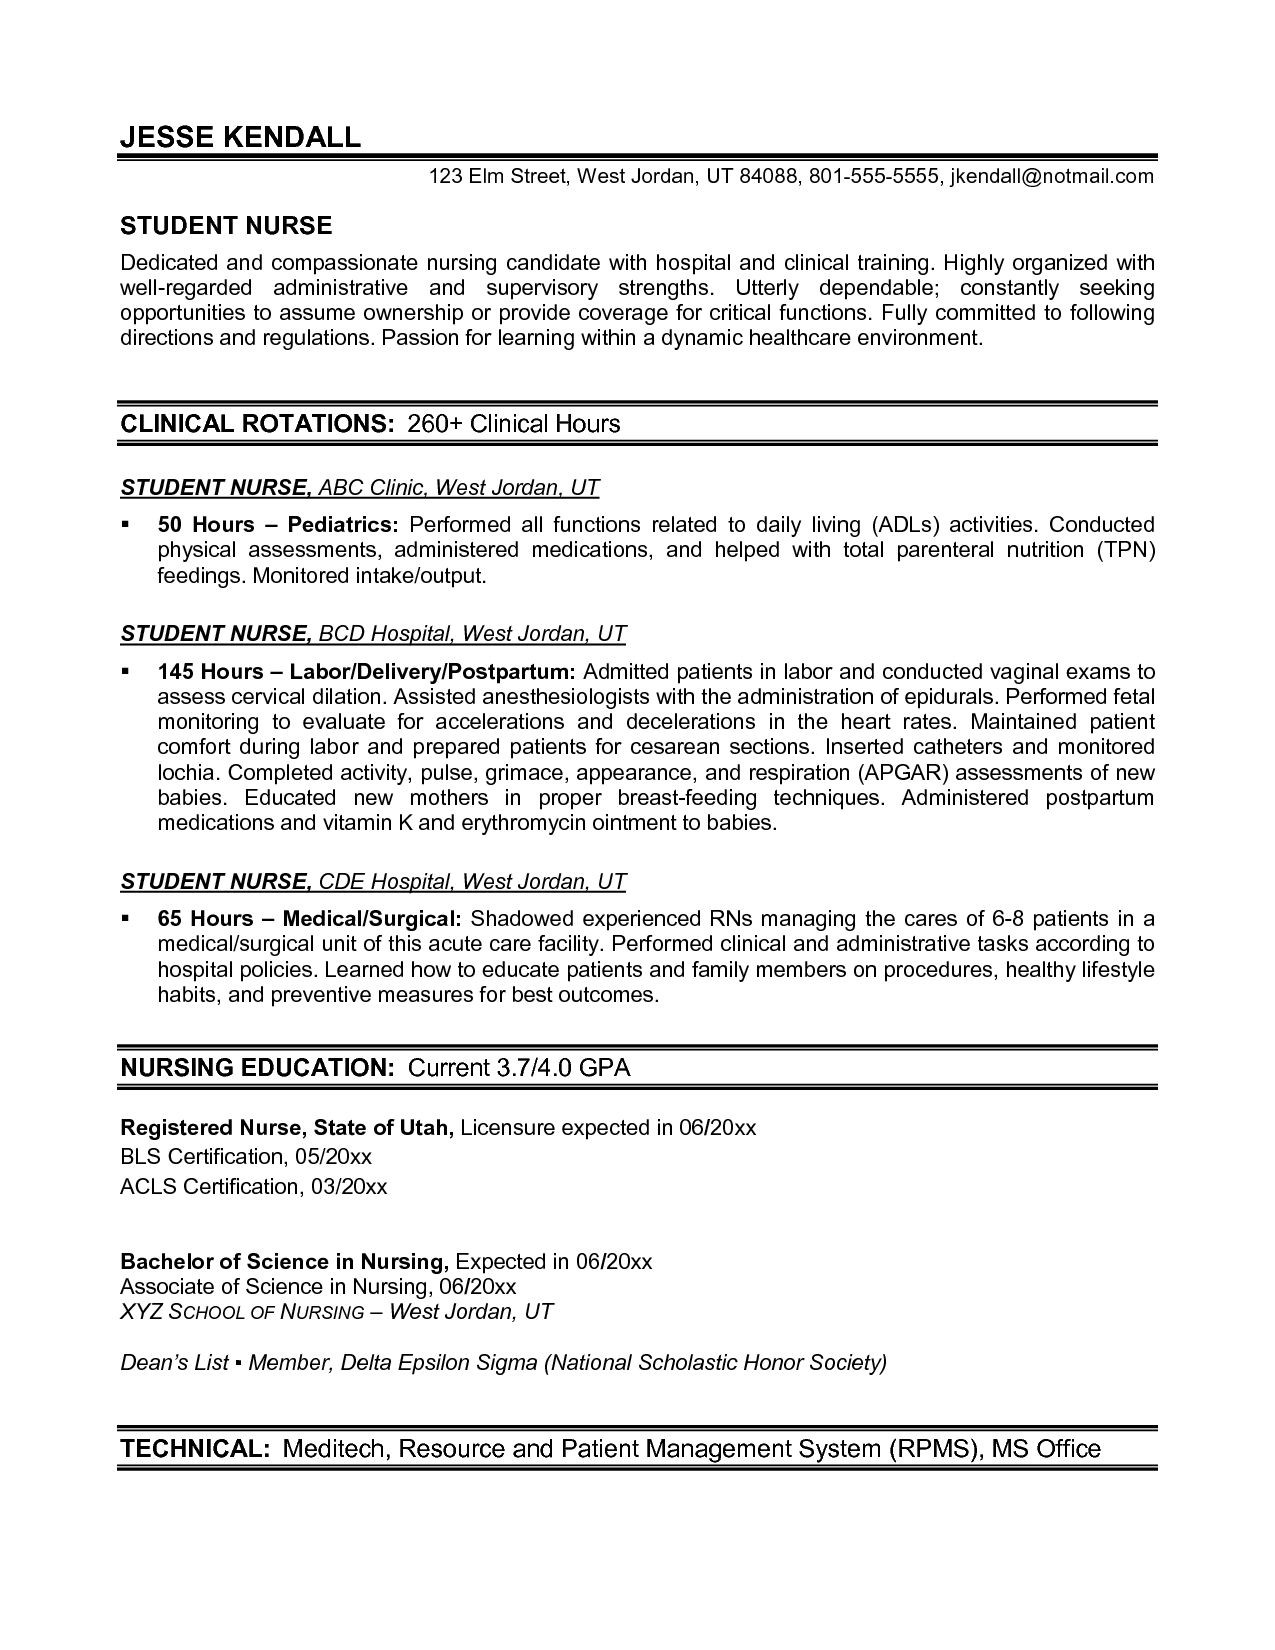 Samples Of Nursing Resumes for A Labor and Delivery Position New Grad Resume Labor and Delivery Rn – Yahoo Image Search Results …